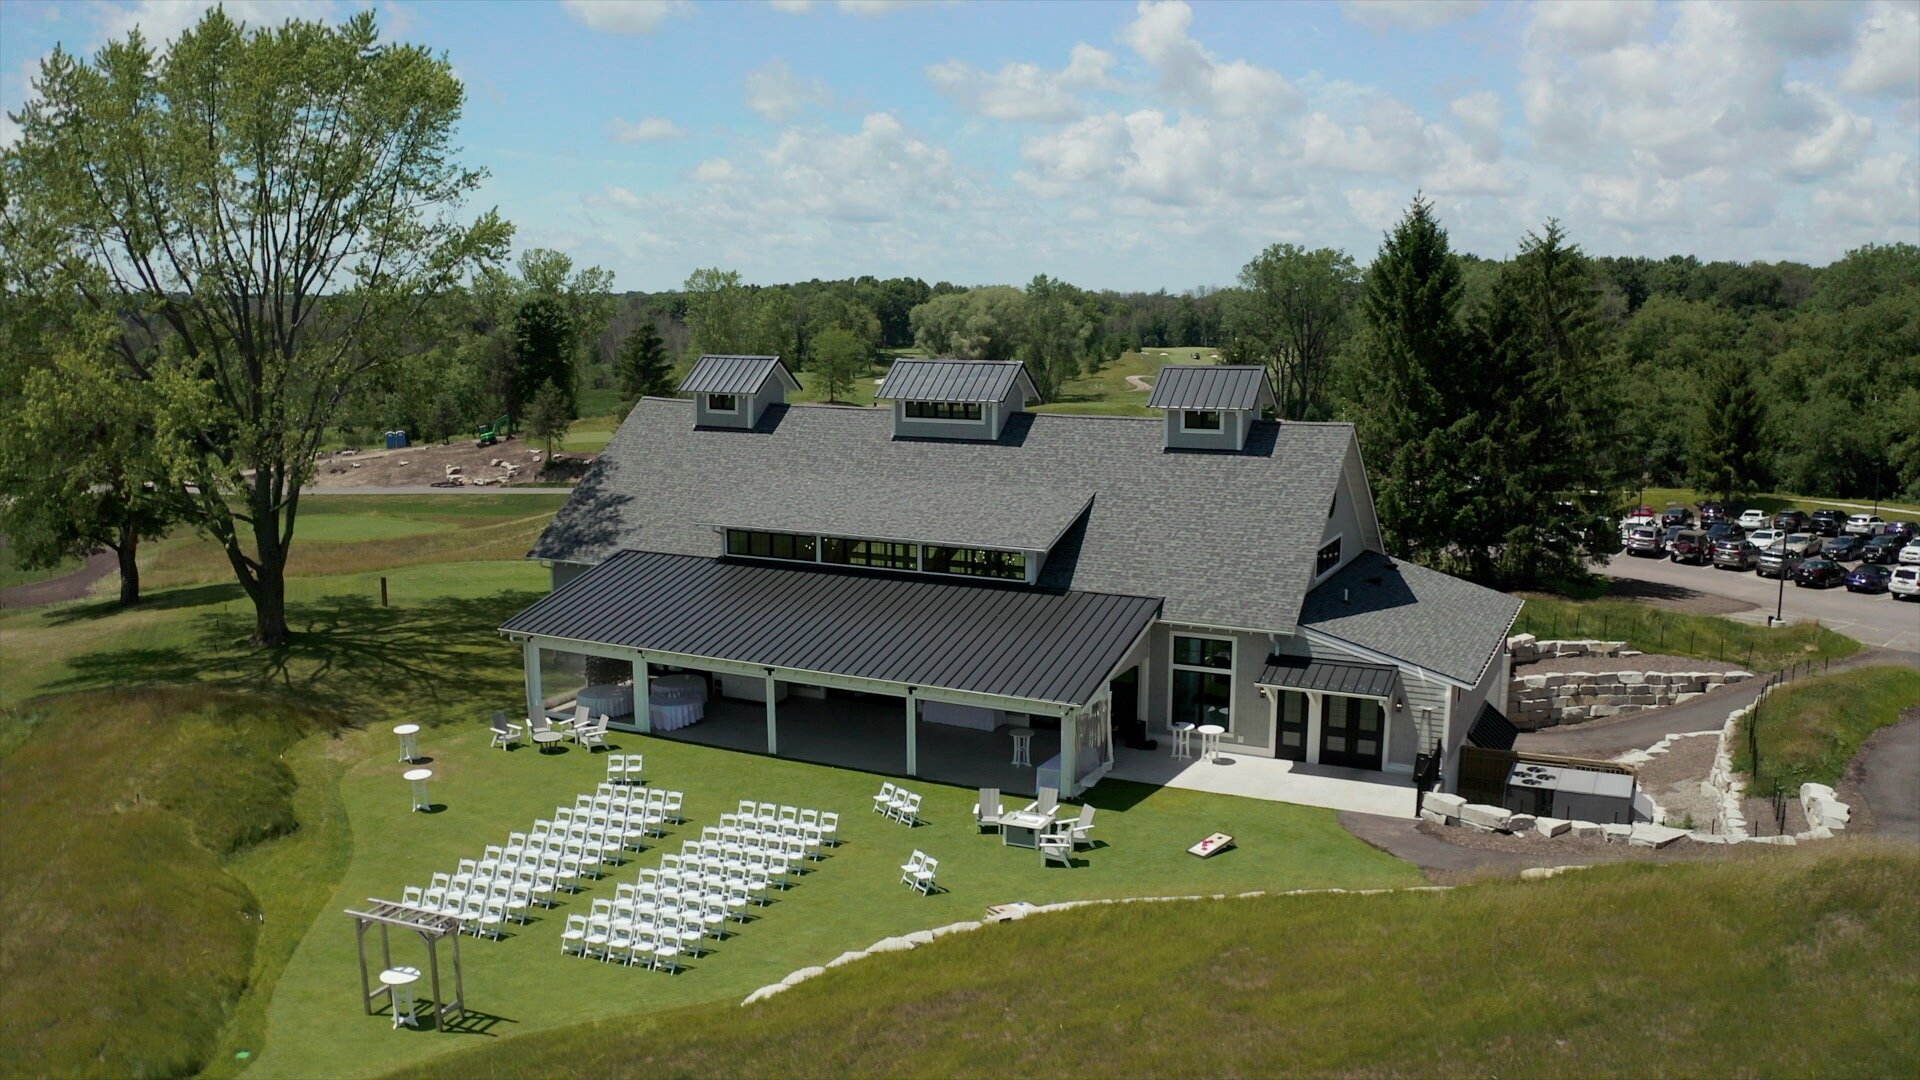 Aerial Shot of the Carriage house wedding venue